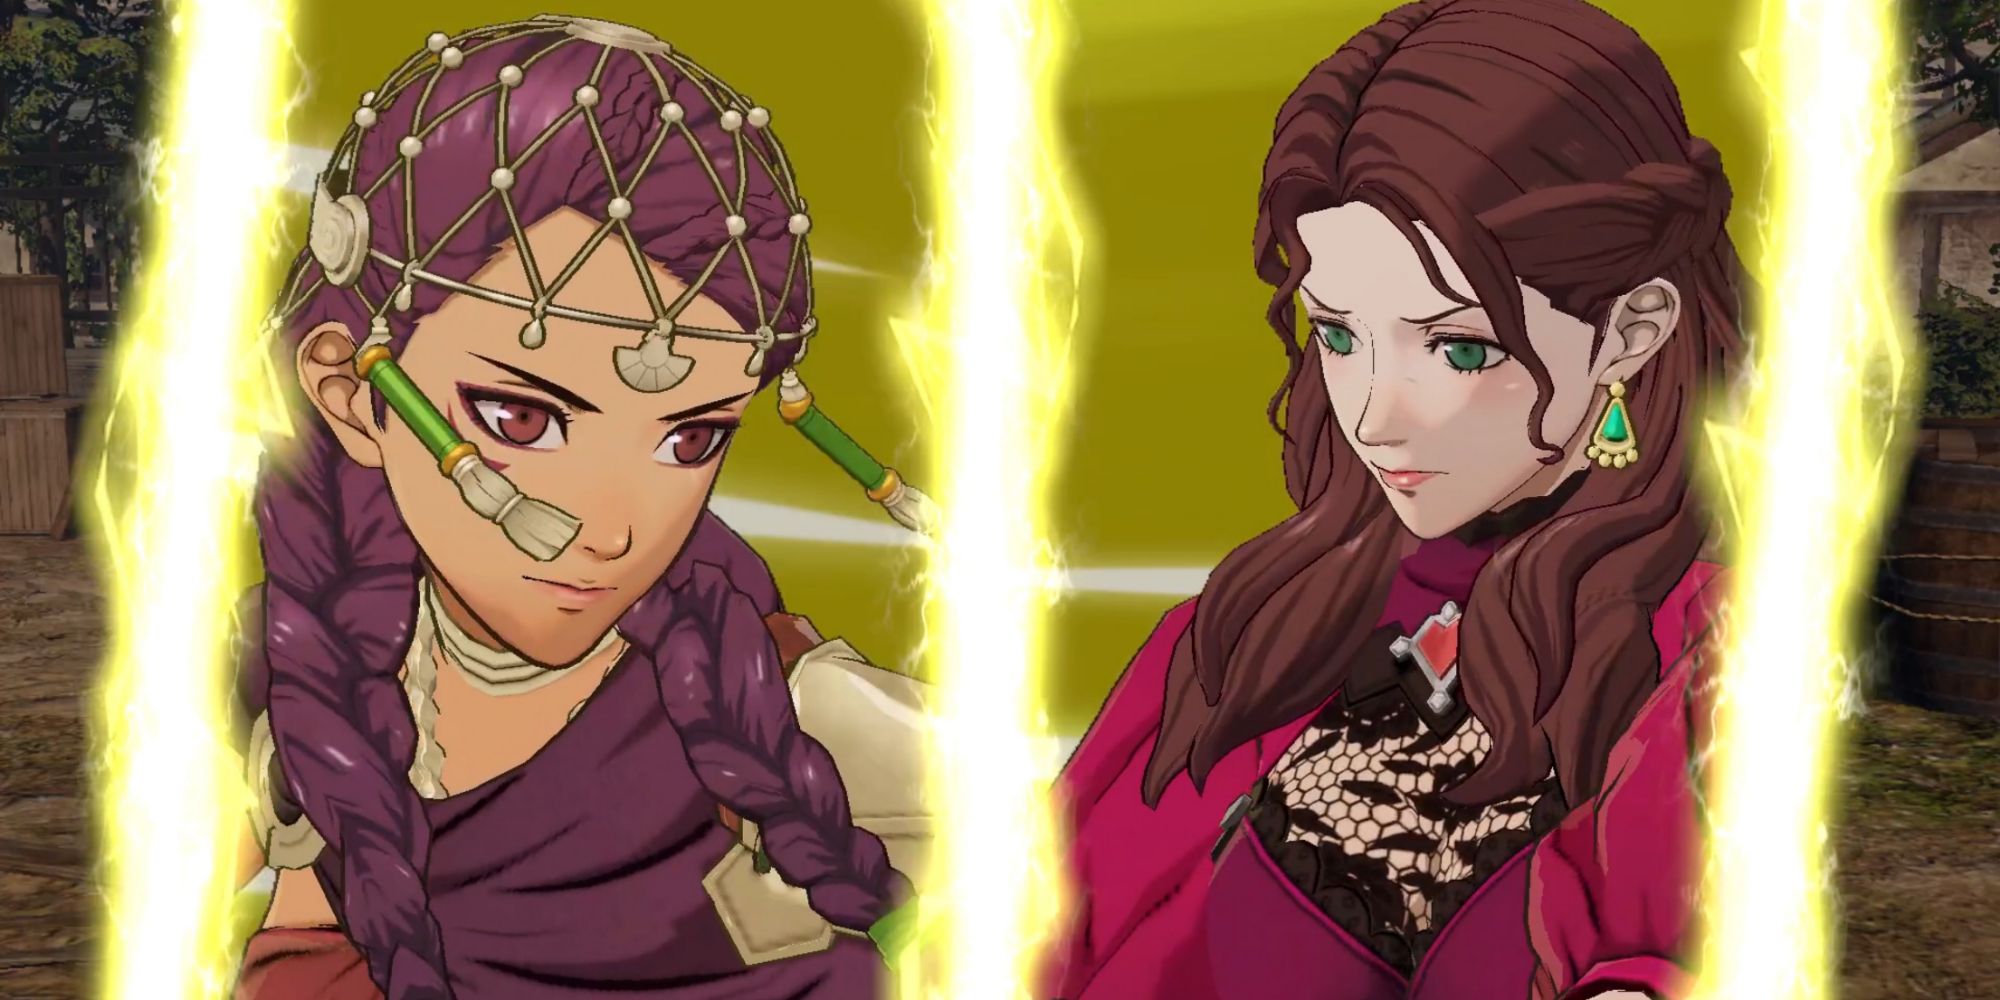 Petra and Doretha from Fire Emblem prepare to attack together in a flashy yellow cutscene